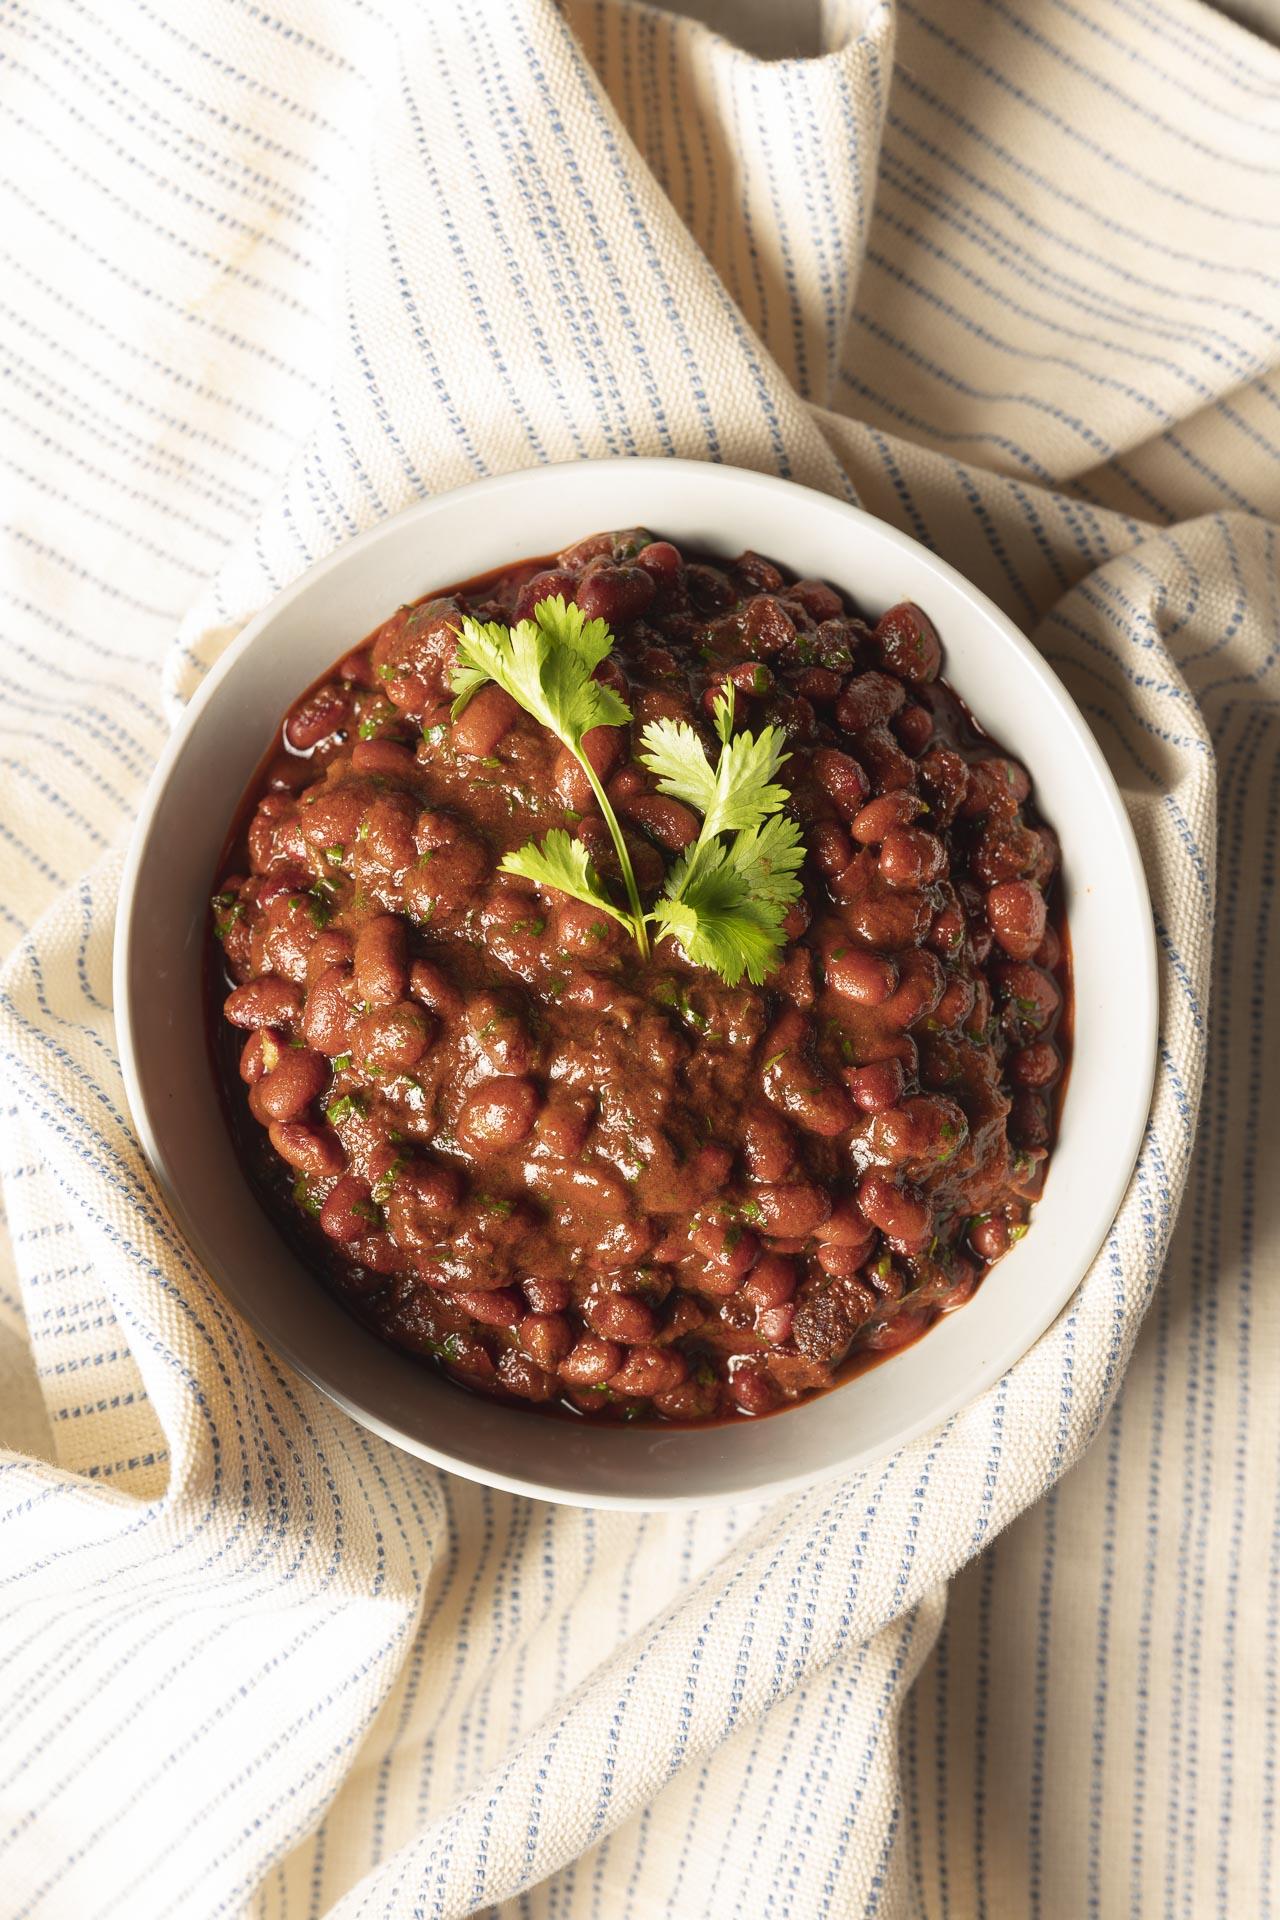 Bunches & Bunches Smoked Oaxacan Mole Baked Beans